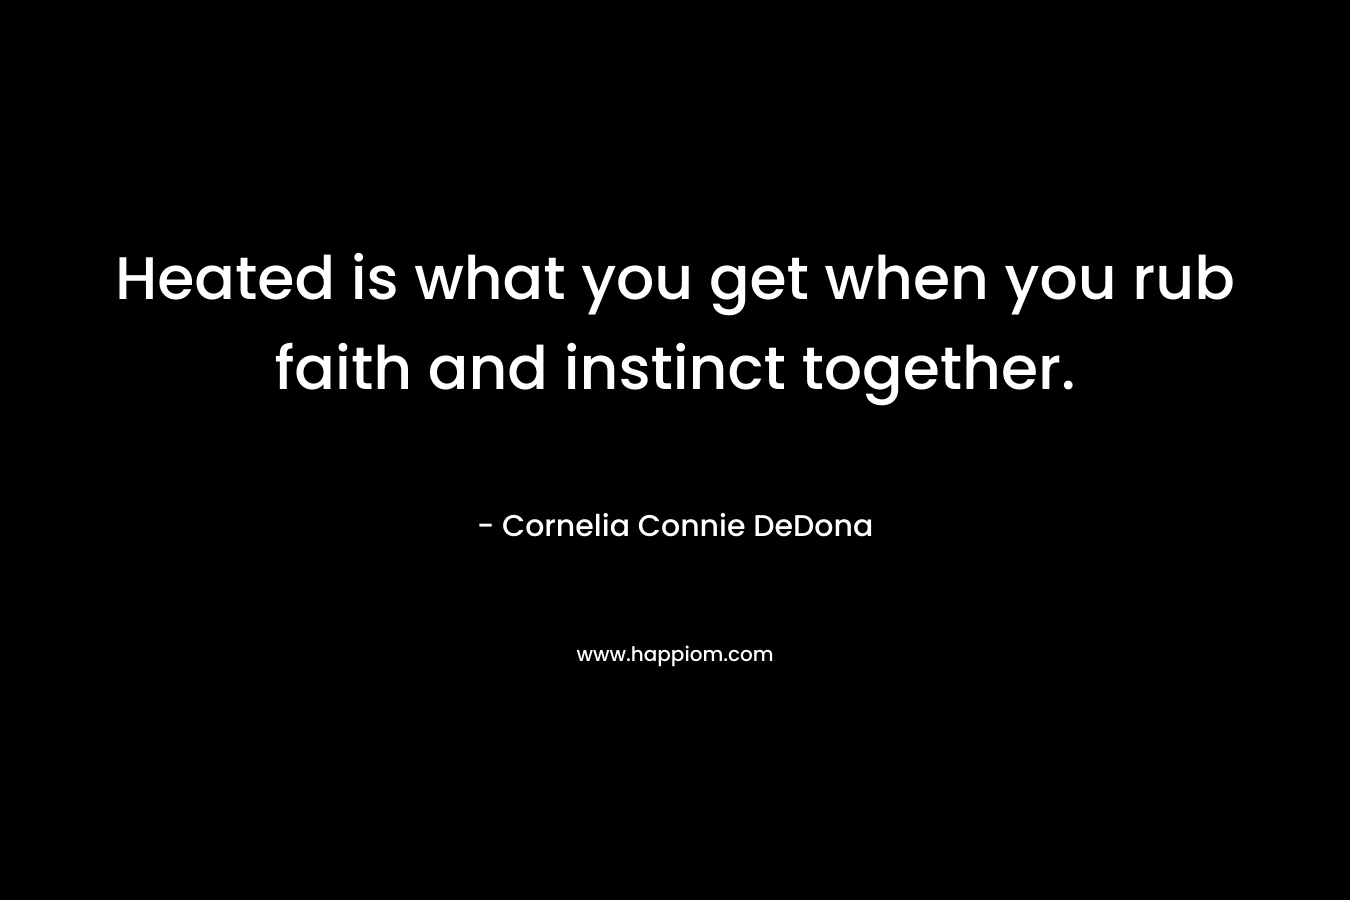 Heated is what you get when you rub faith and instinct together. – Cornelia Connie DeDona